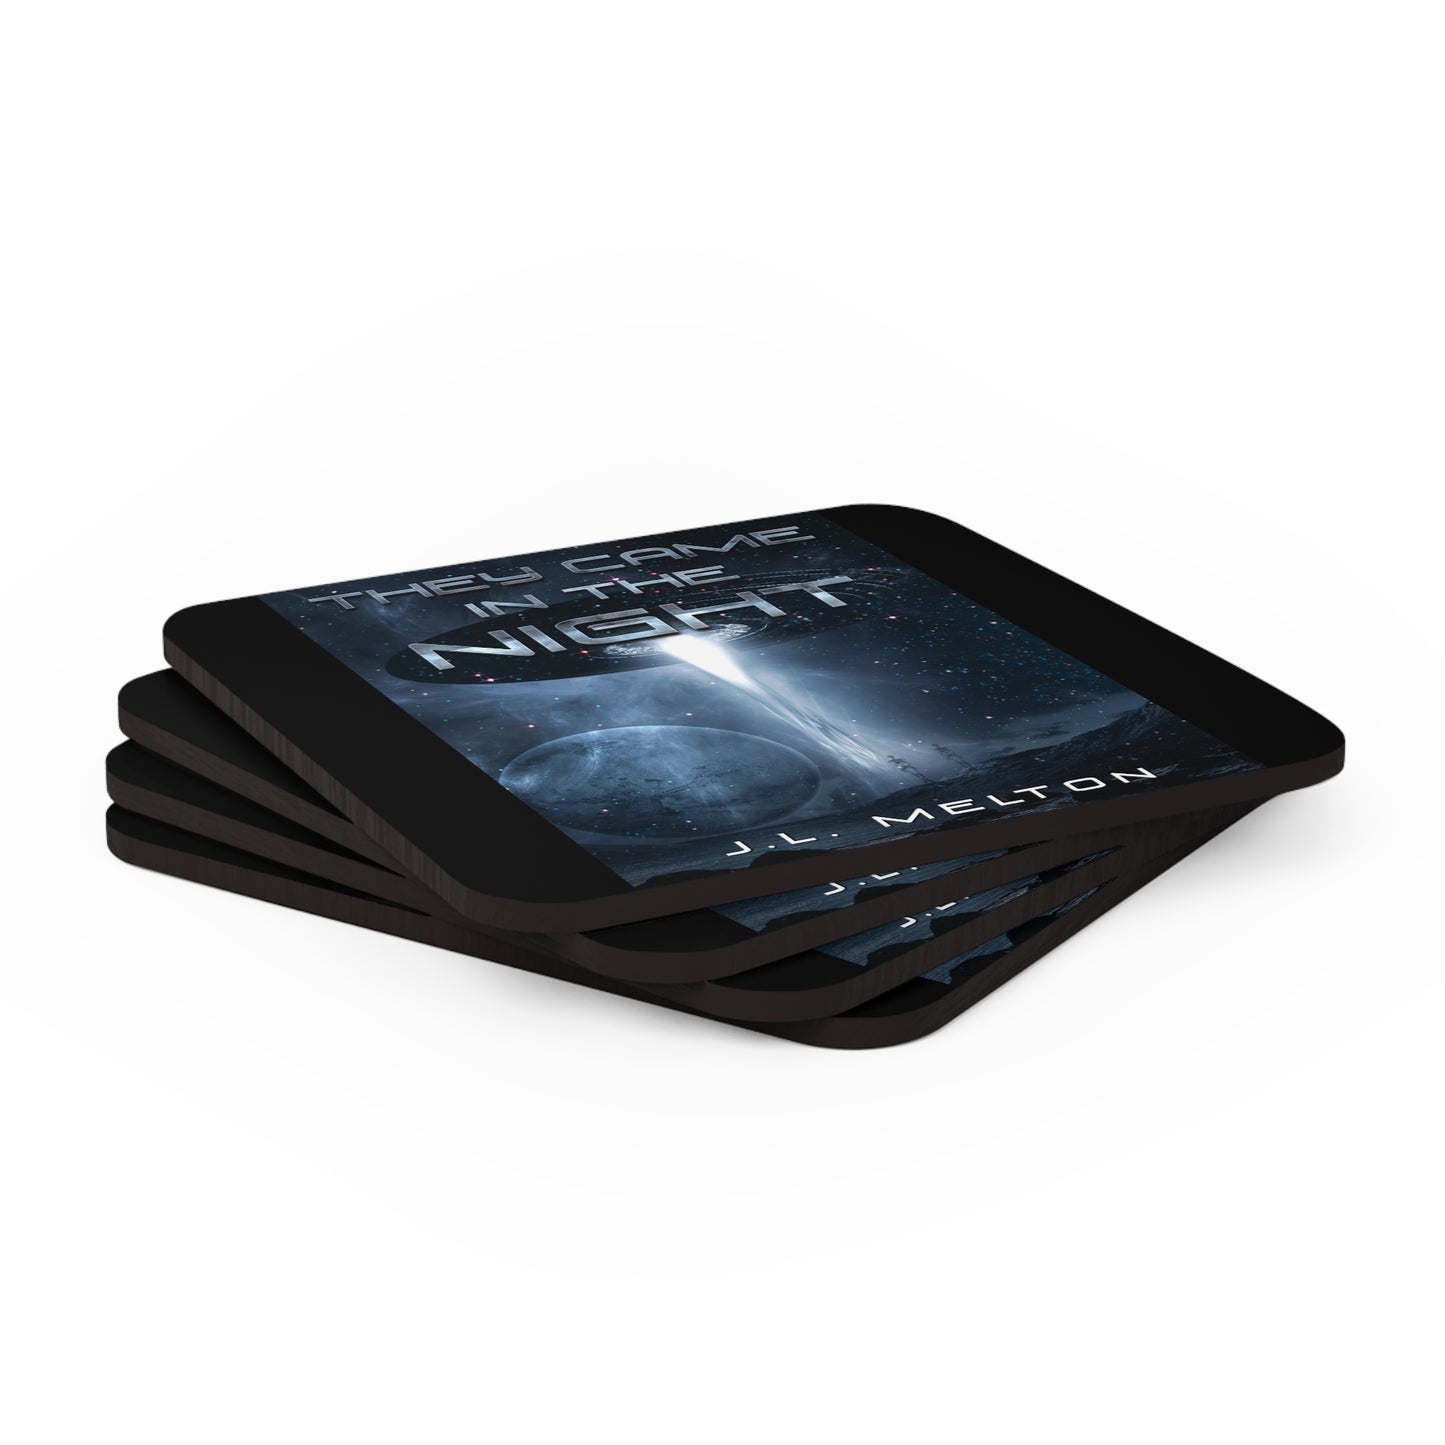 They Came In The Night - Corkwood Coaster Set